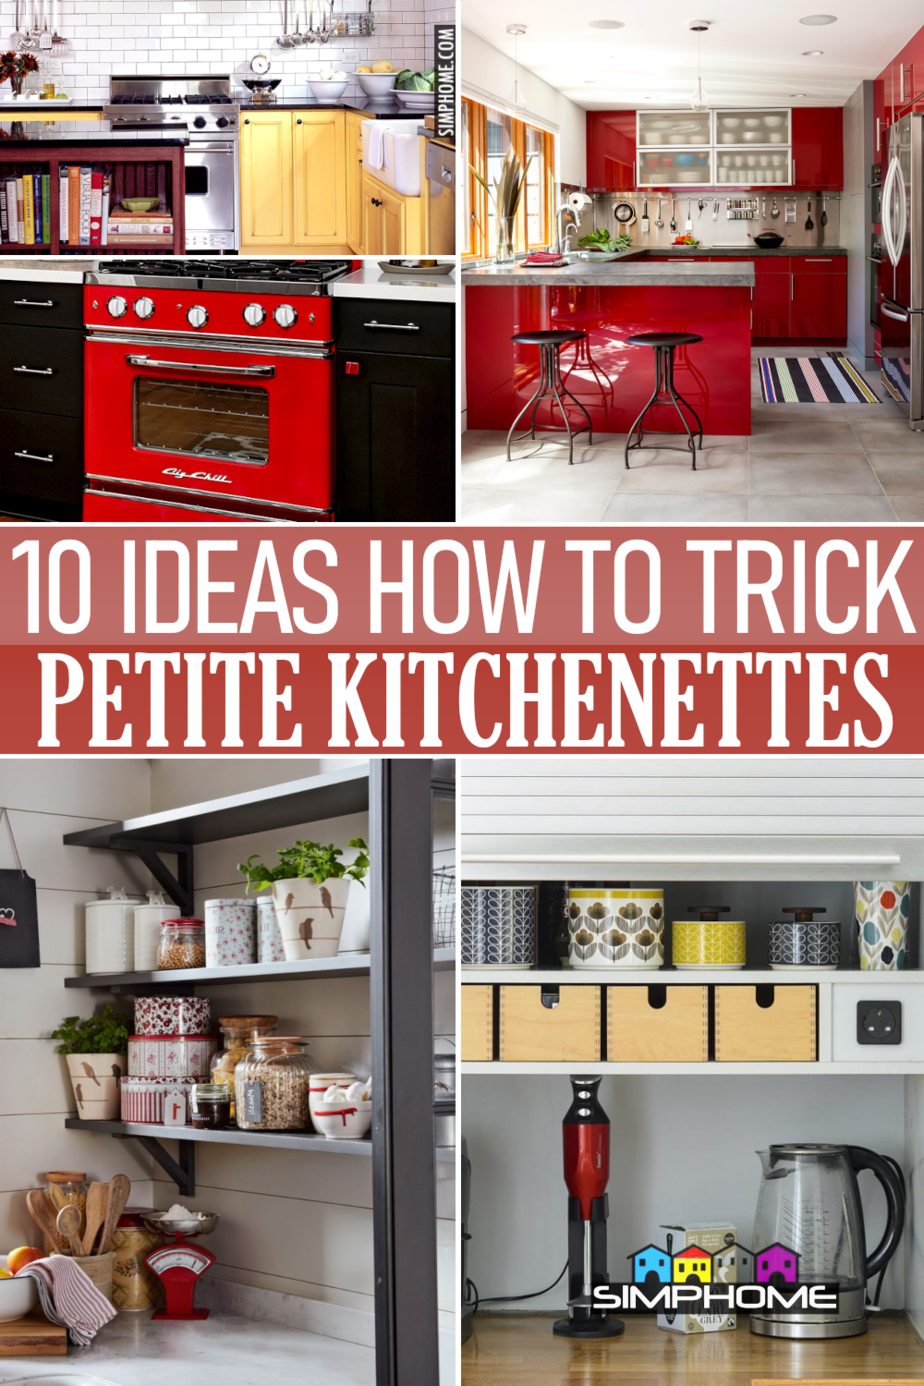 10 Clever Ideas to Trick Petite Kitchenette VIA Simphome.comFeatured